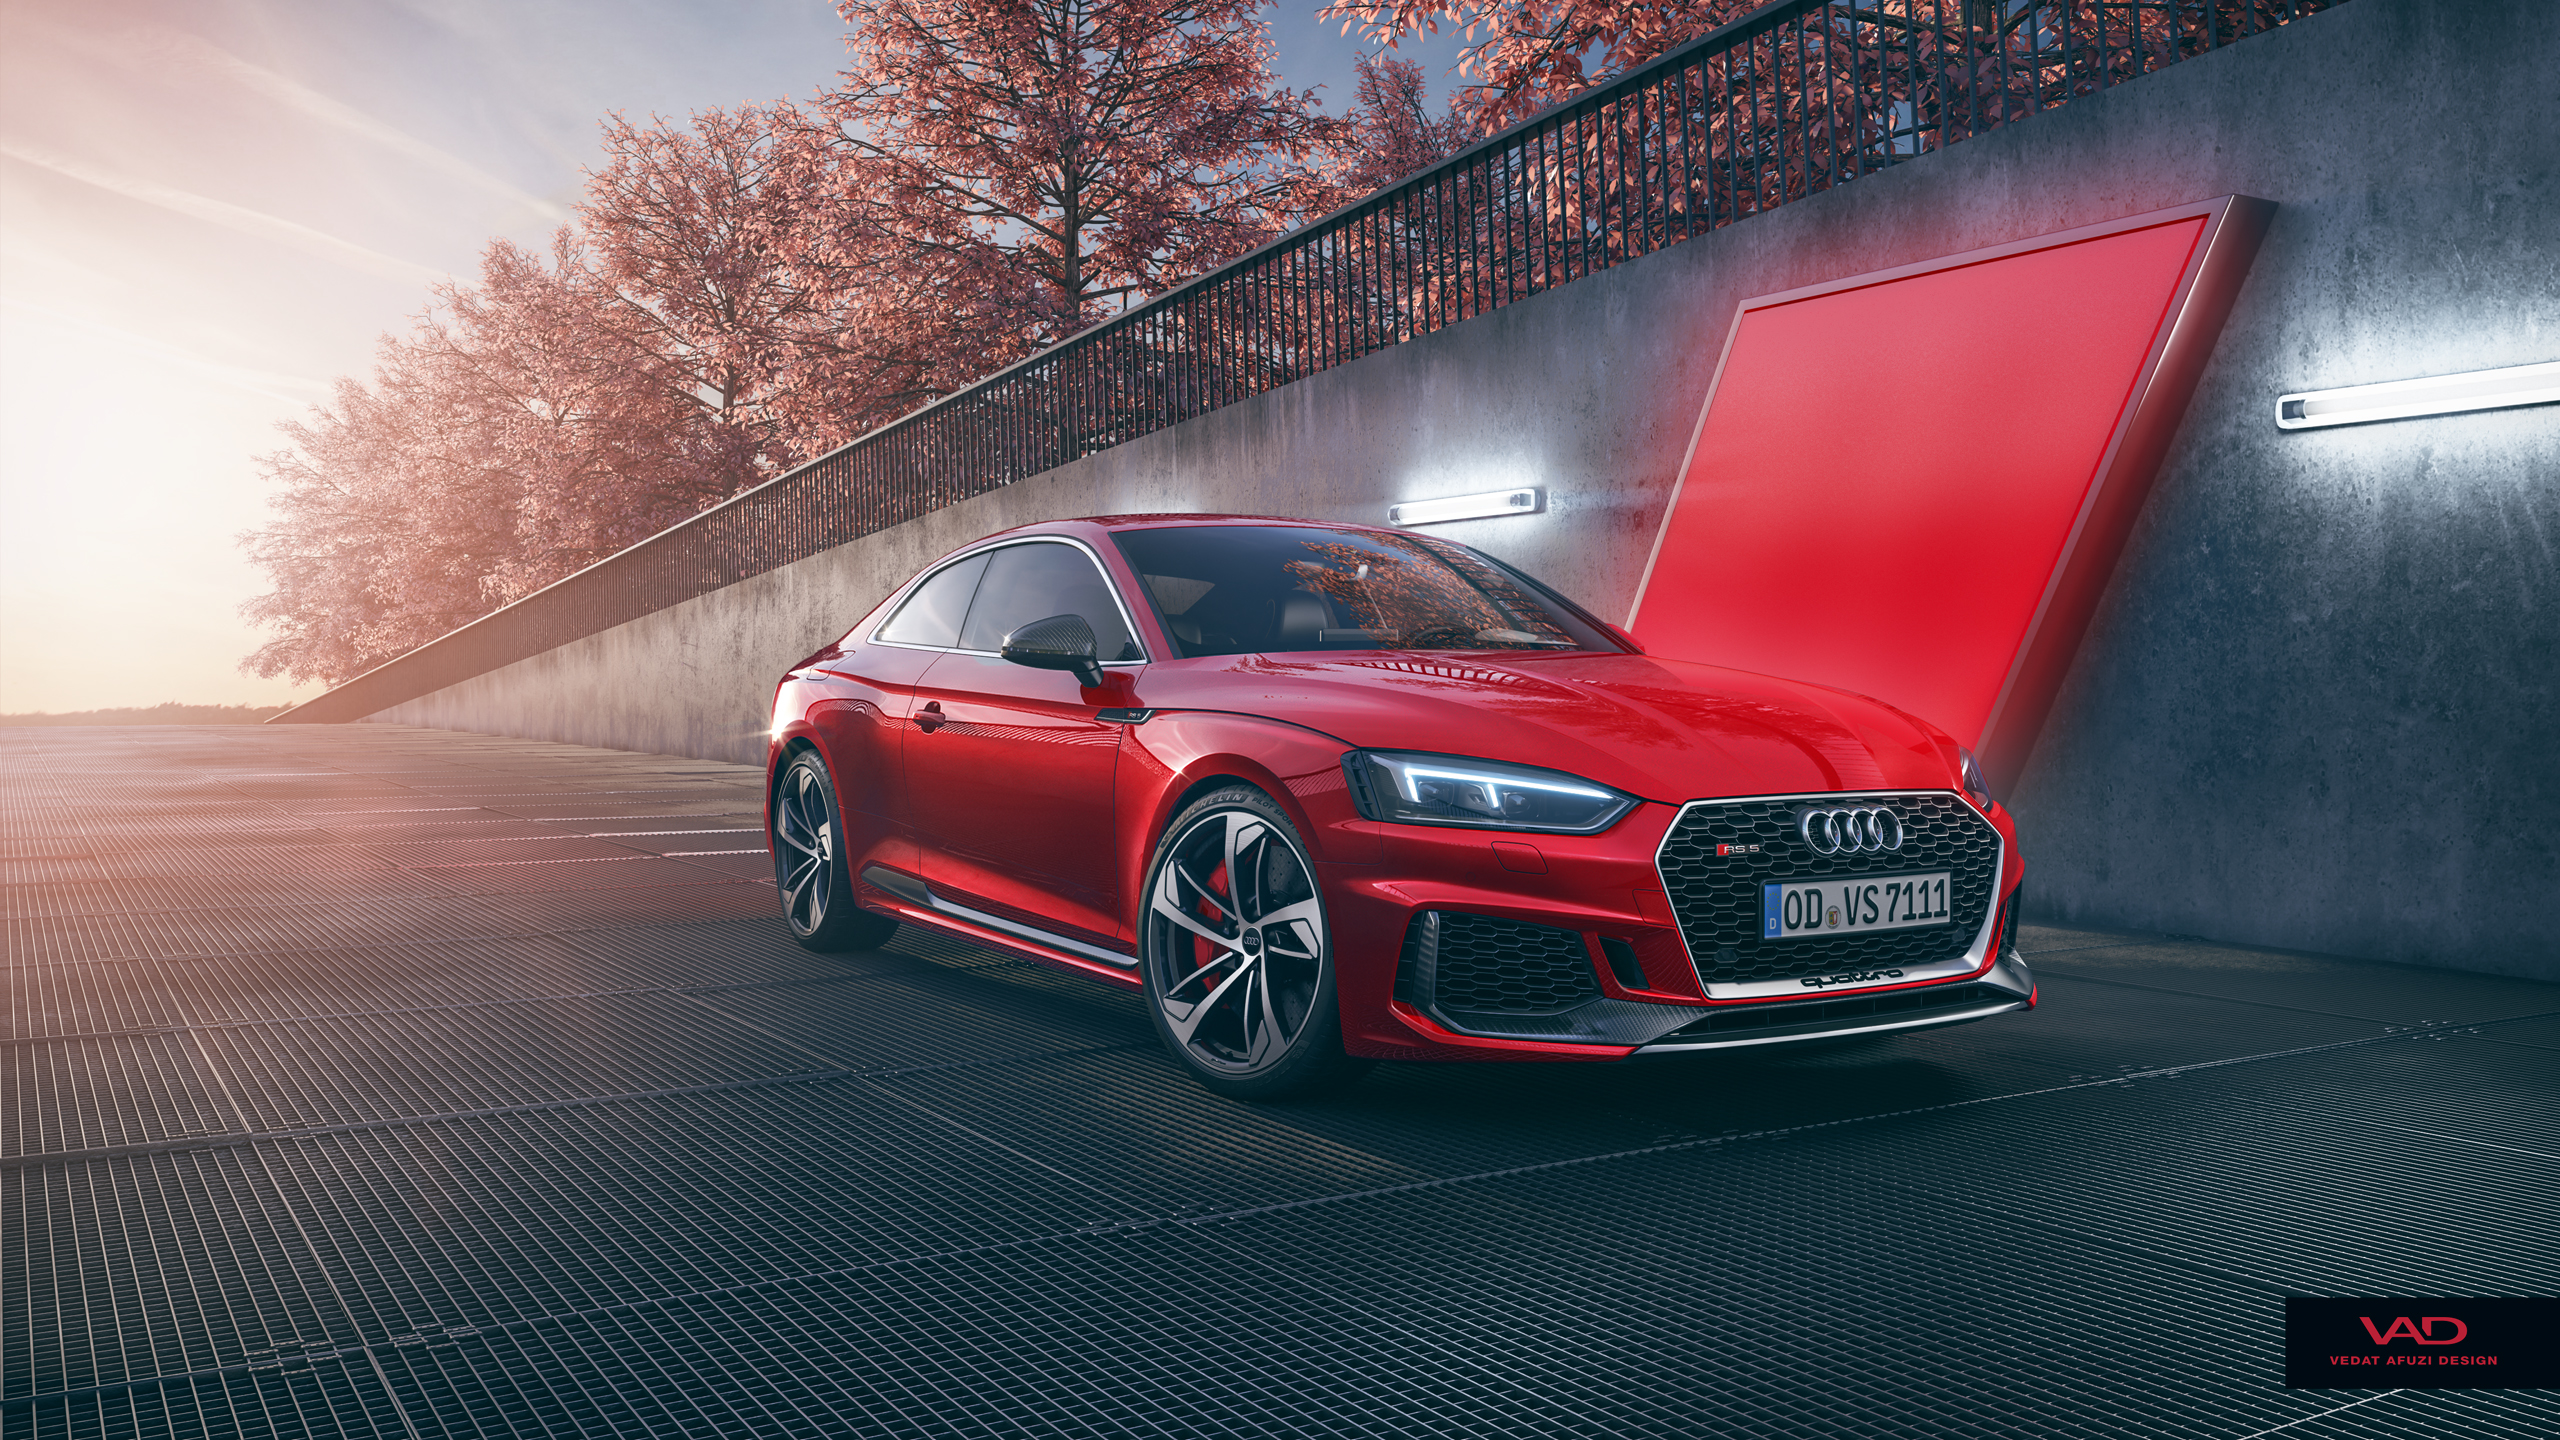 Audi RS5 Coupe CGI Wallpaper | HD Car Wallpapers | ID #8400